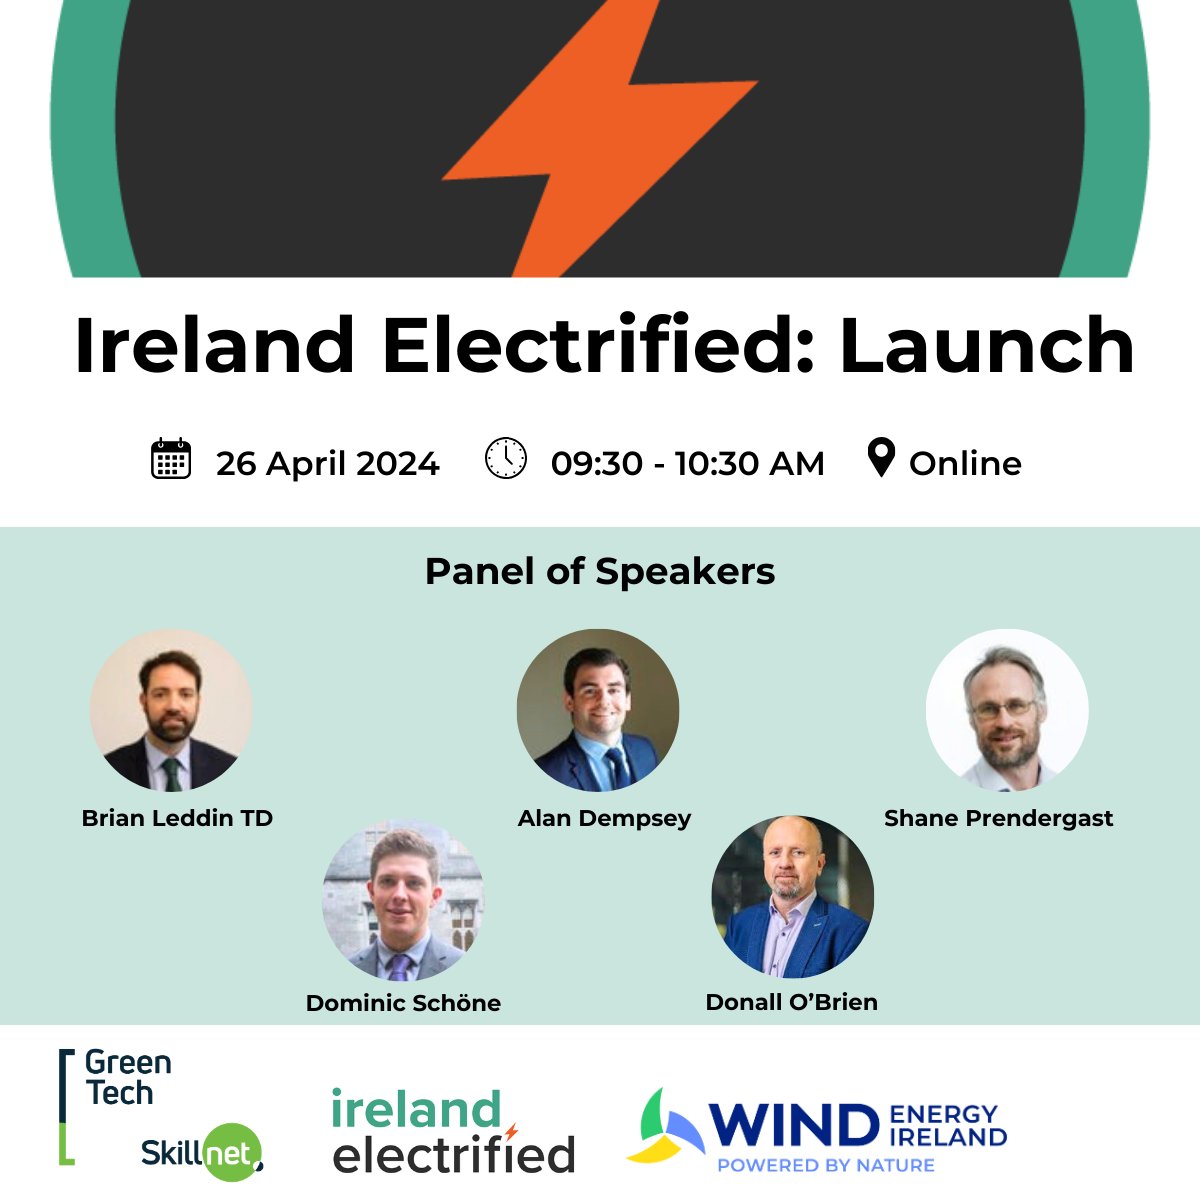 Join us on 26 April to learn about Ireland Electrified, an association representing electric heat and electric transport, advocating for change for its members so electrification can expand and fulfill its potential. Register here: greentechskillnet.com/ireland-electr…